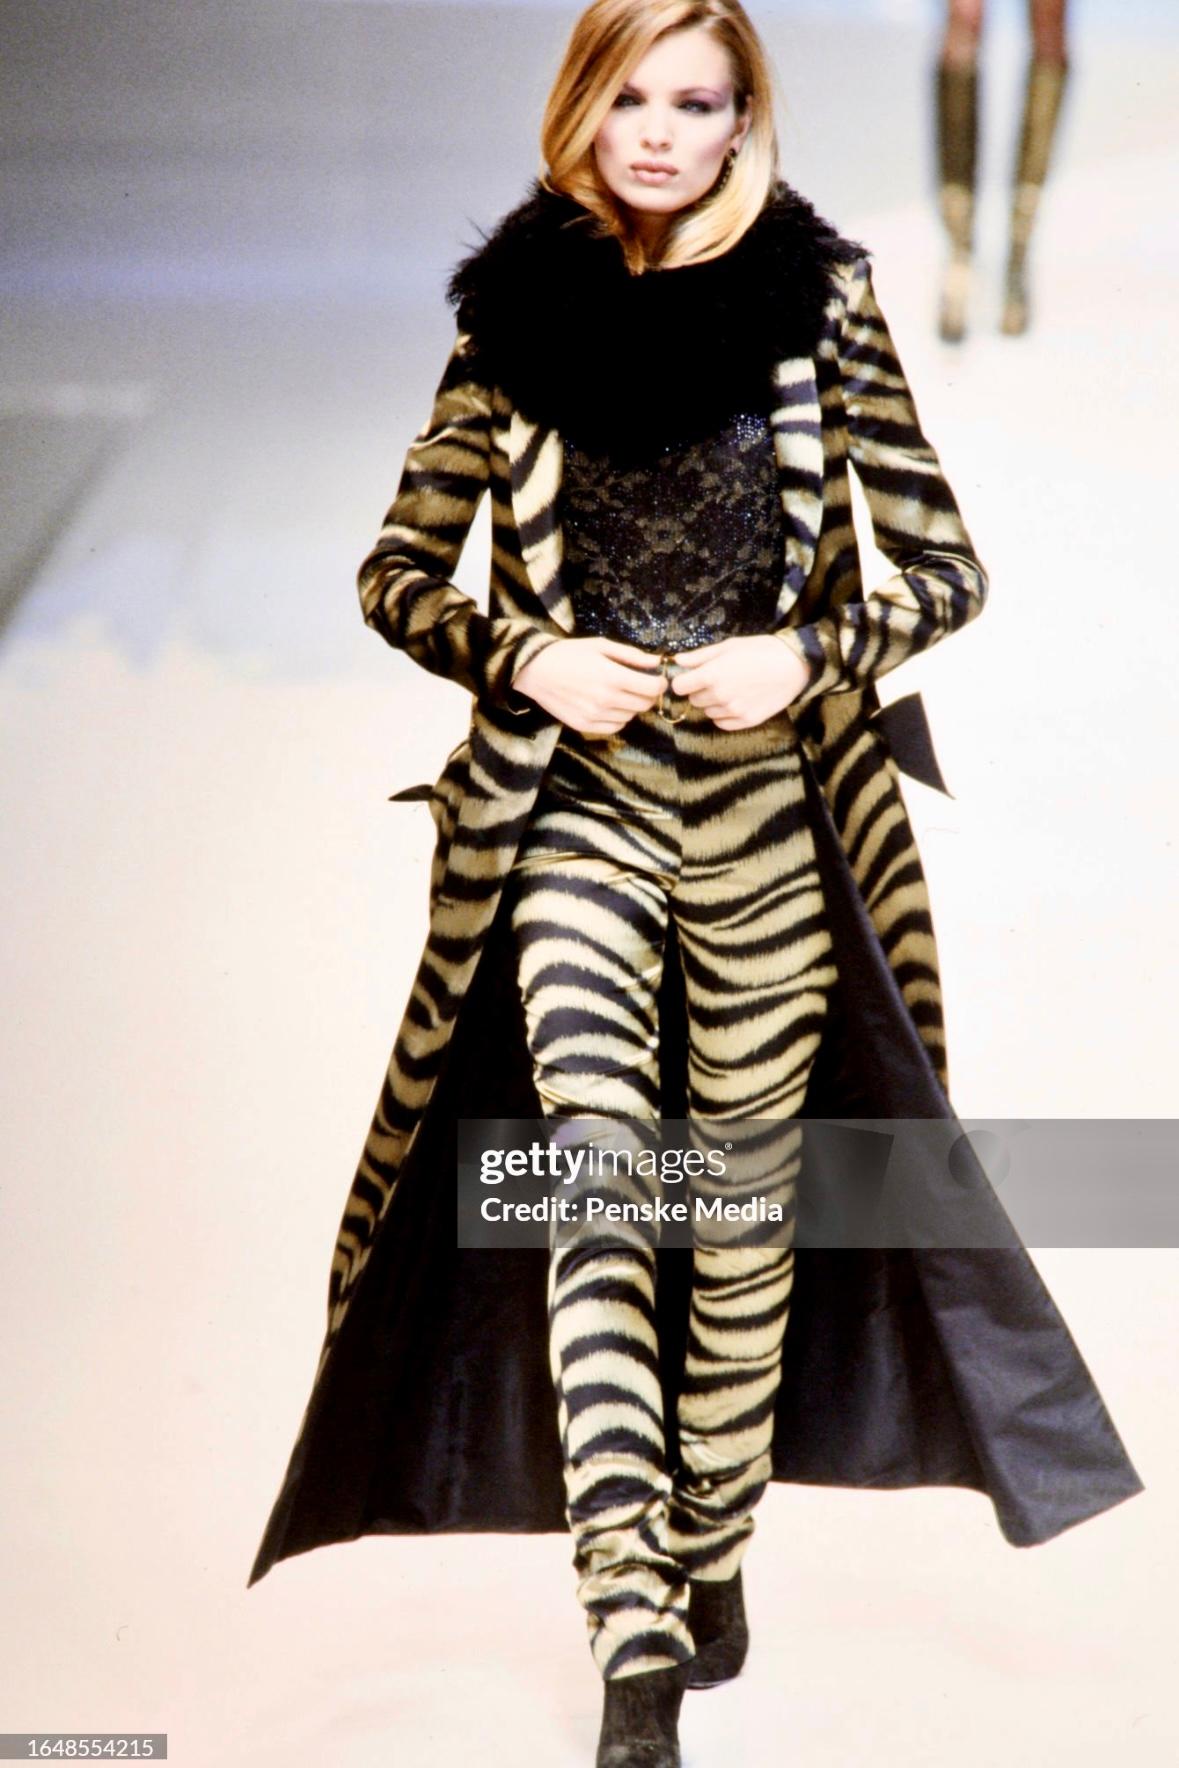 In celebration of Valentino's 30th anniversary, this full-length tiger stripe-length Valentino coat is an updated nod to the original Fall 1967 Haute Couture version. Similar to the original version, as worn by Veruschka in Vogue and captured by